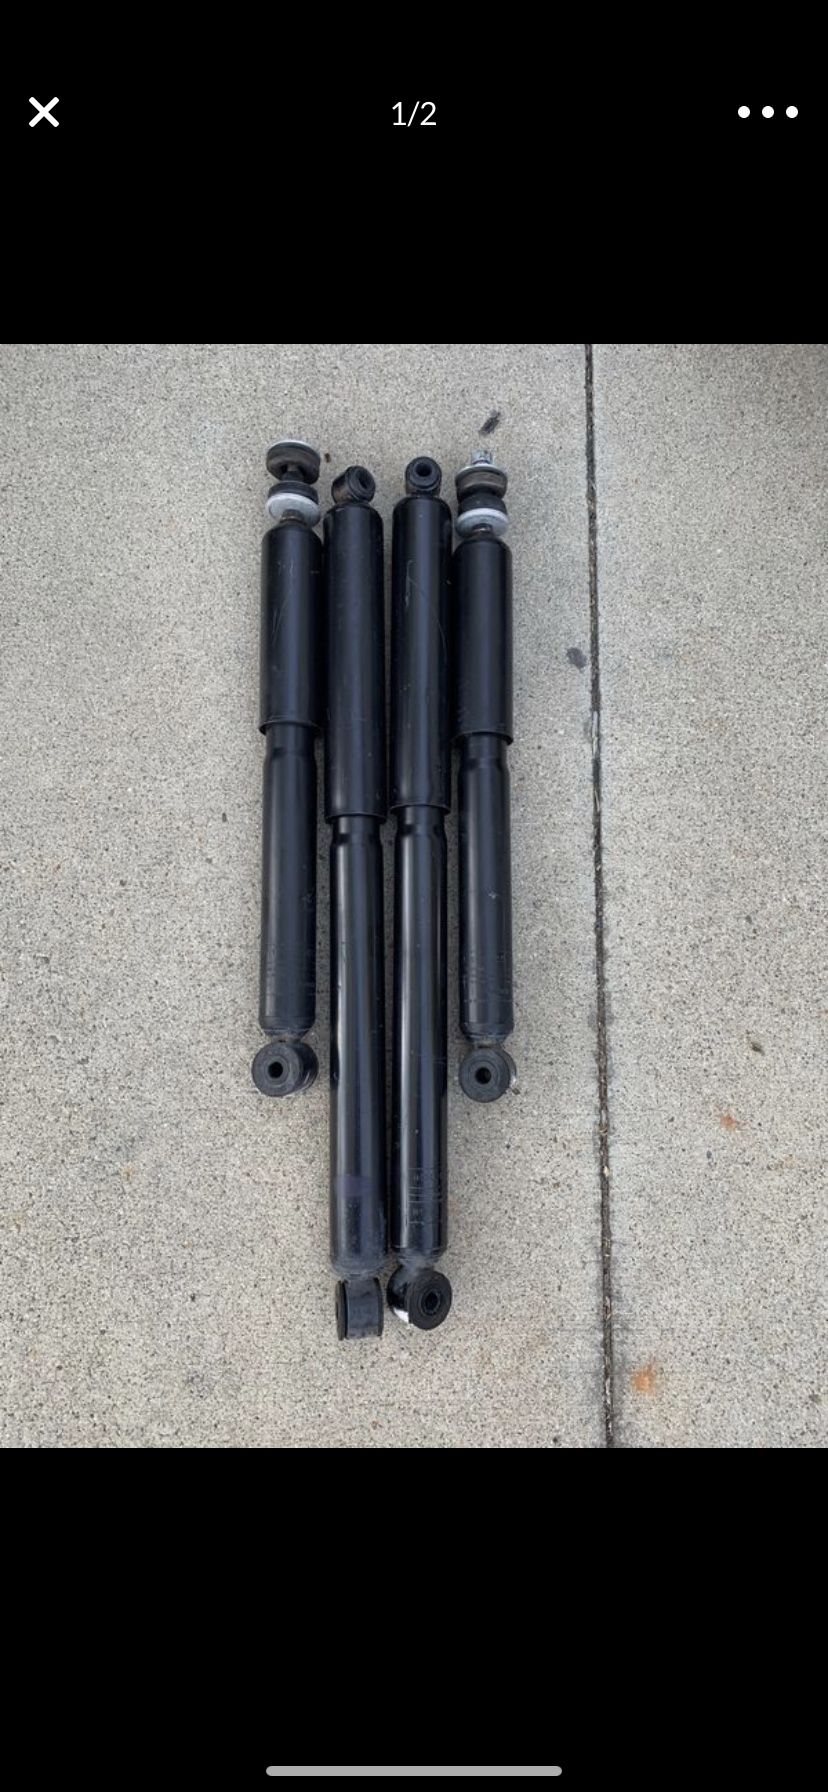 Ford F-250 f-350 2005 - 2016 shock absorbers. OEM ford parts